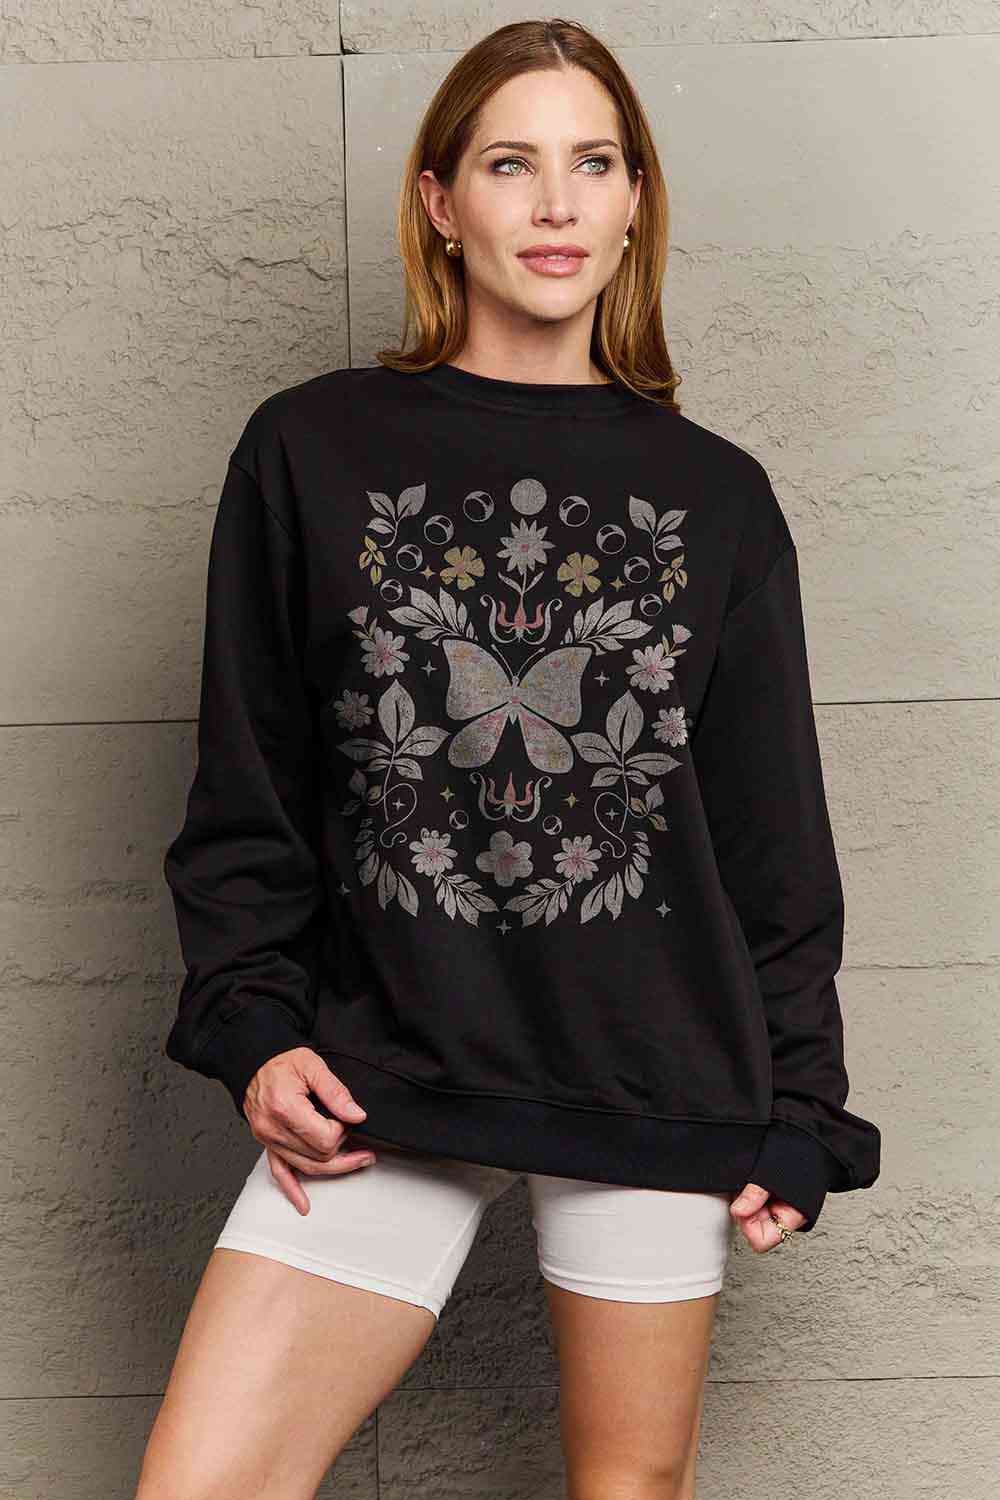 Simply Love Simply Love Full Size Flower and Butterfly Graphic Sweatshirt